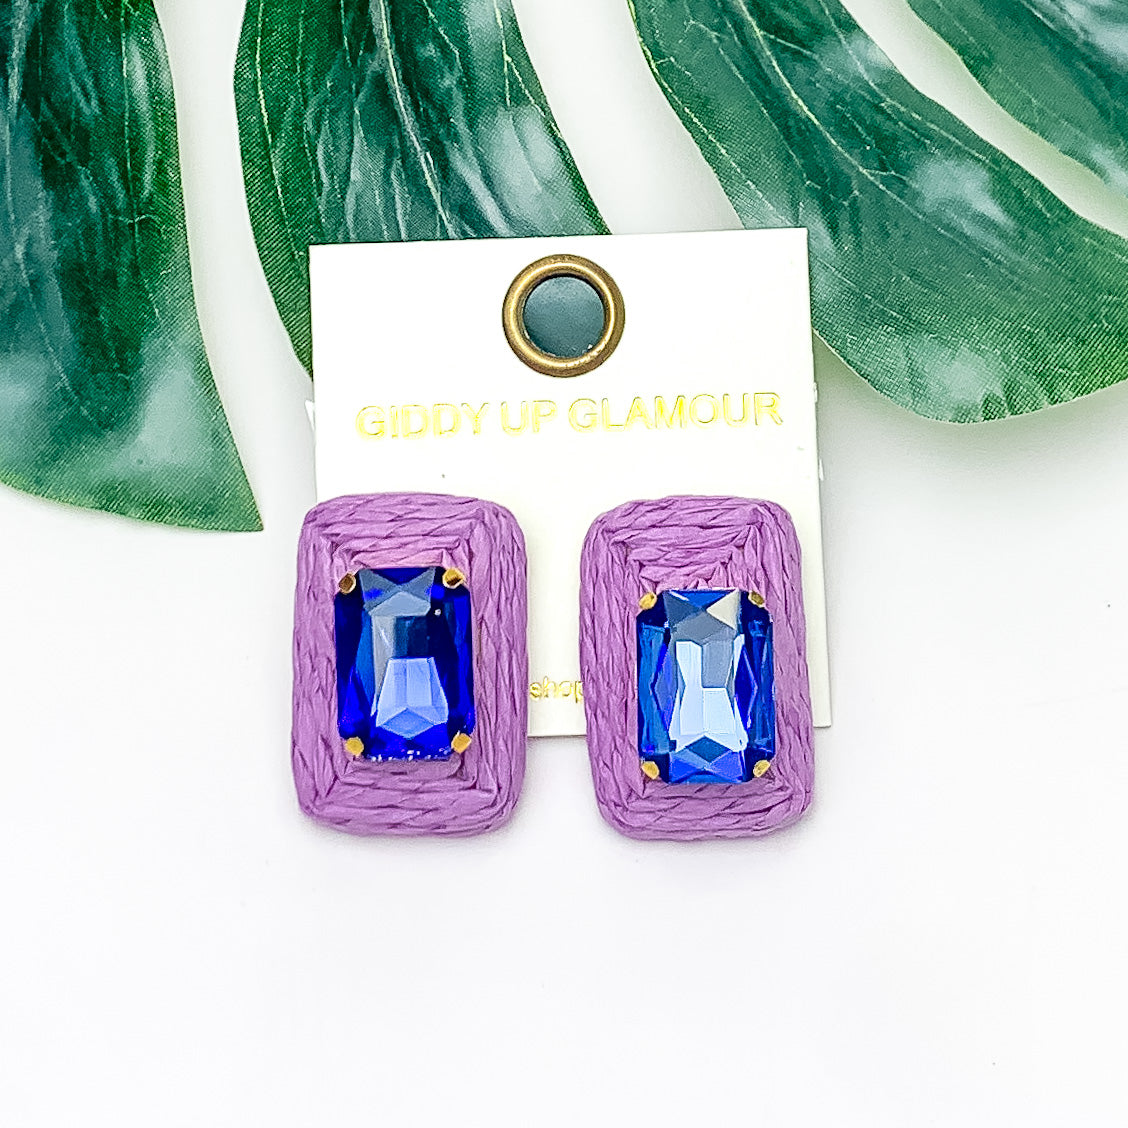 Truly Tropical Raffia Rectangle Earrings in Purple With Blue Stone. Pictured on a white background with the earrings laying on a large leaf.